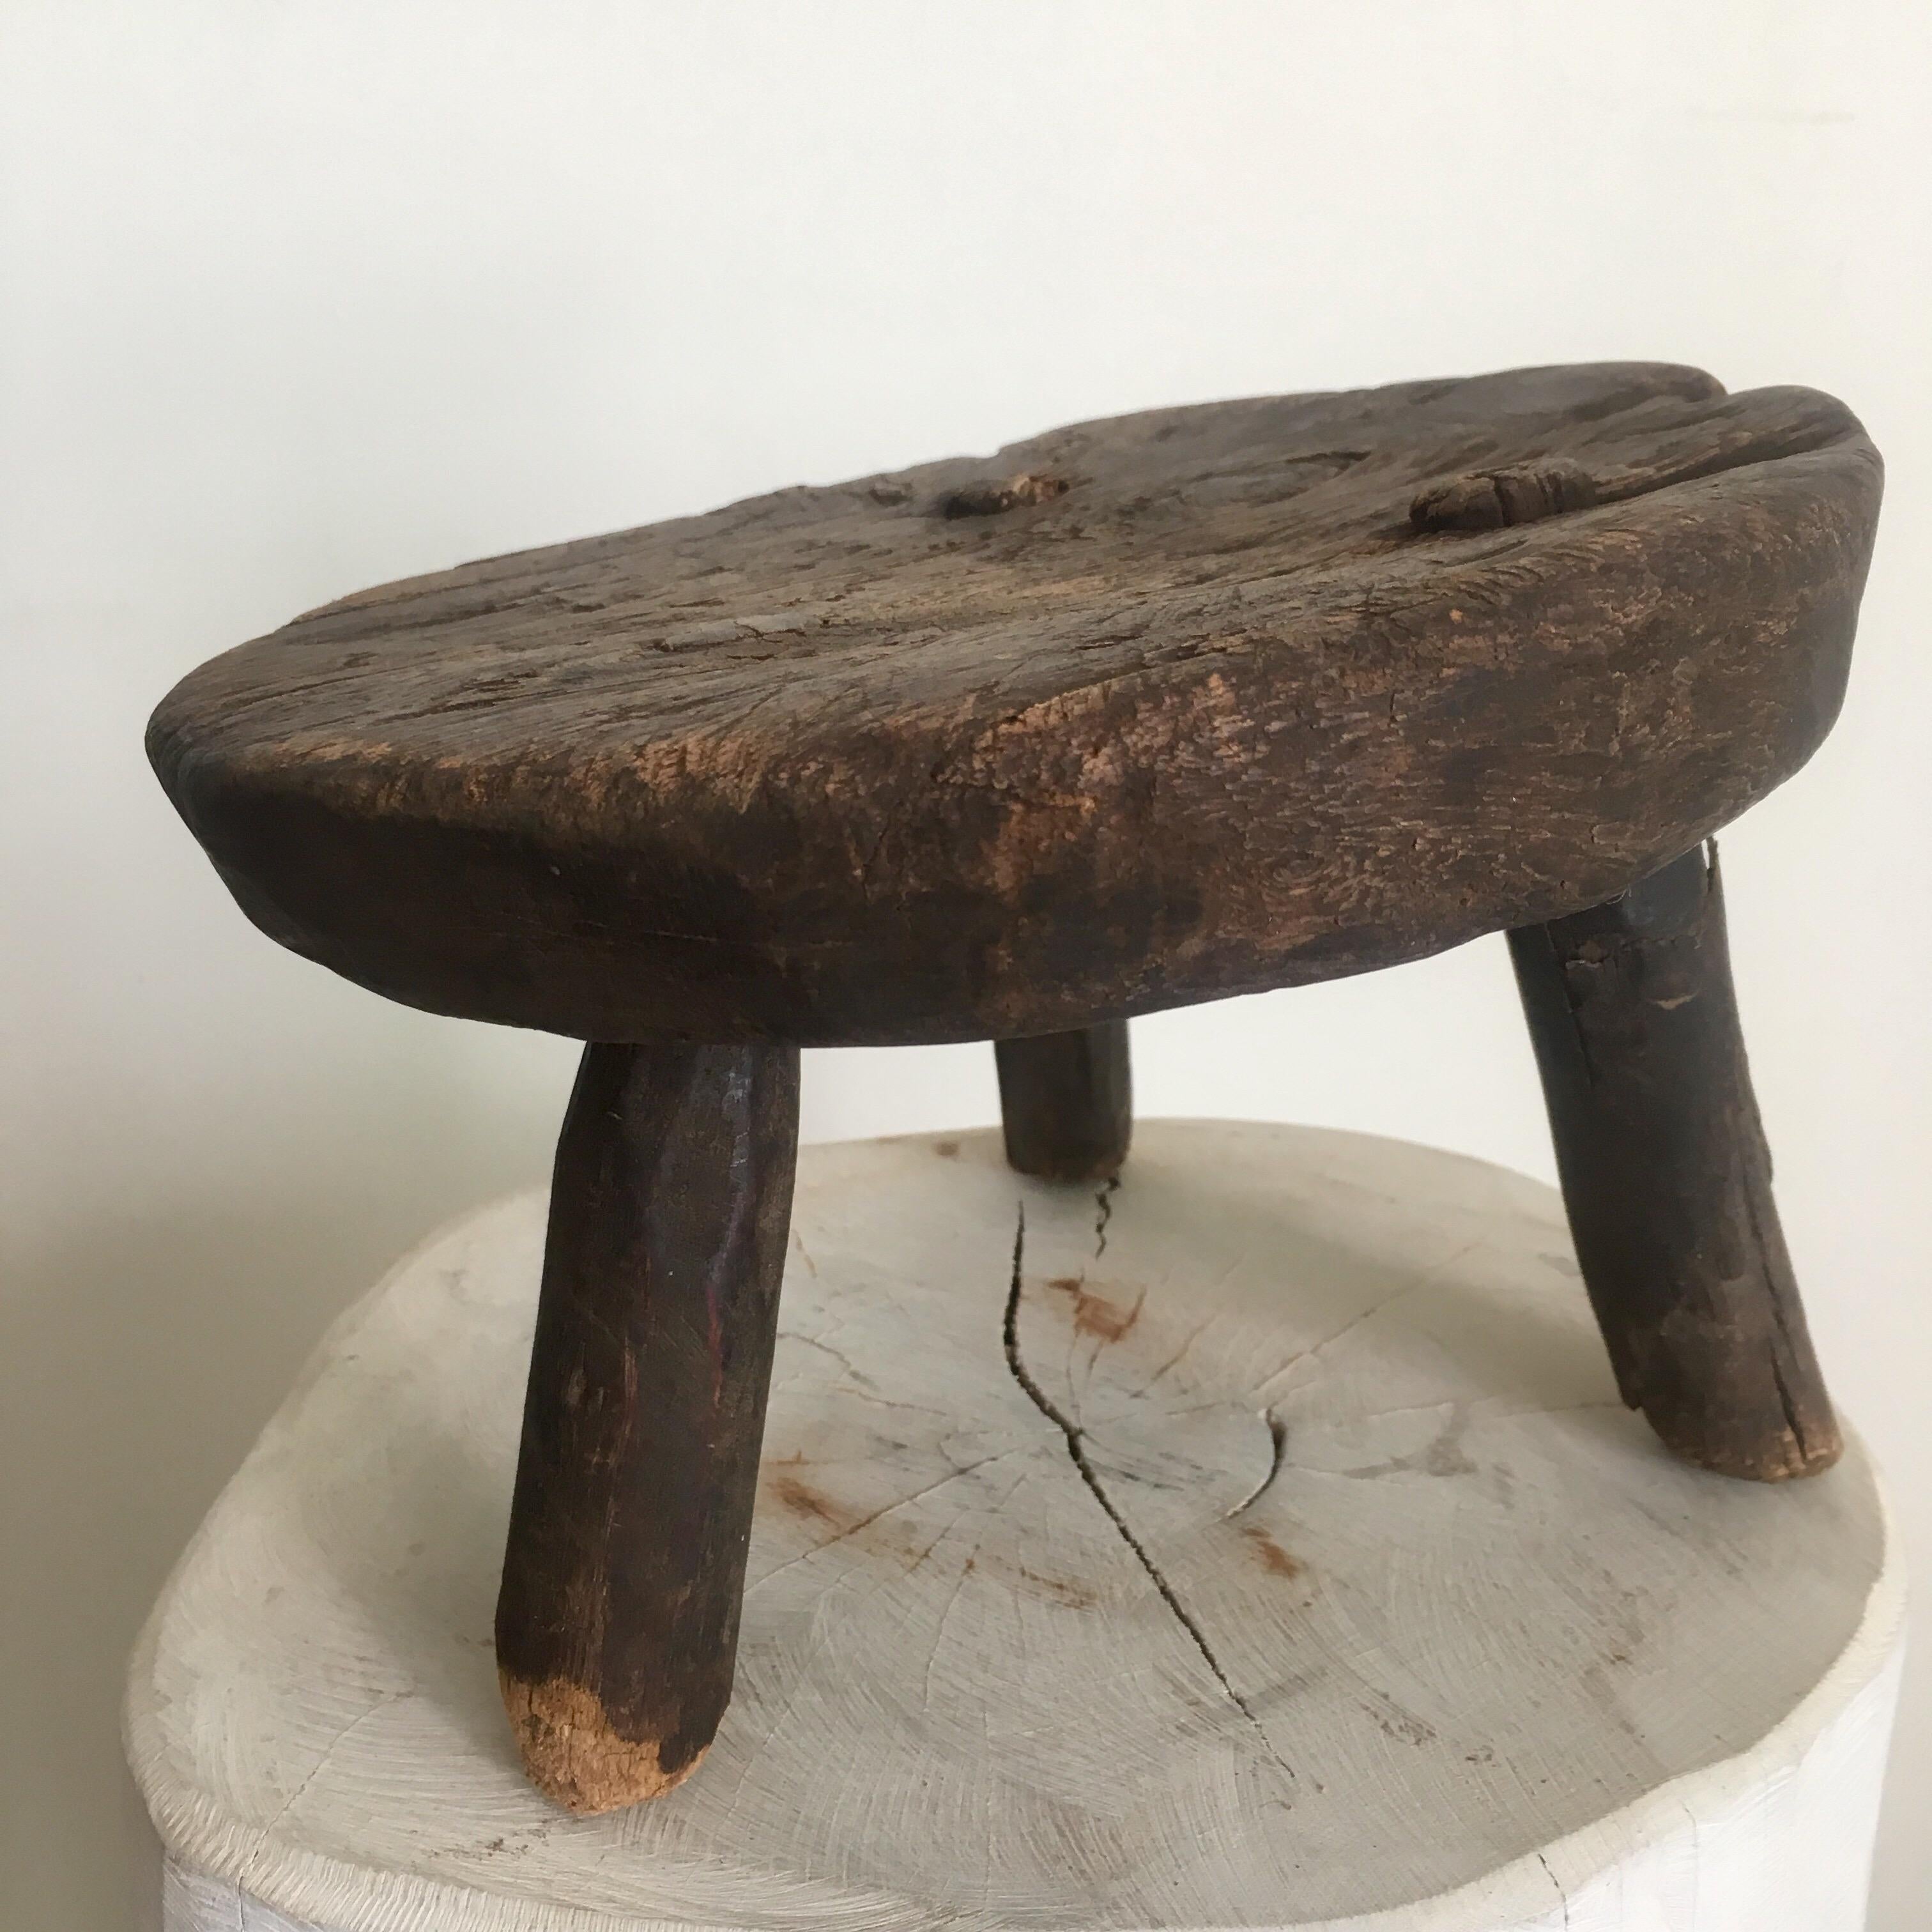 Country Mini Tripod Stool from Mexico